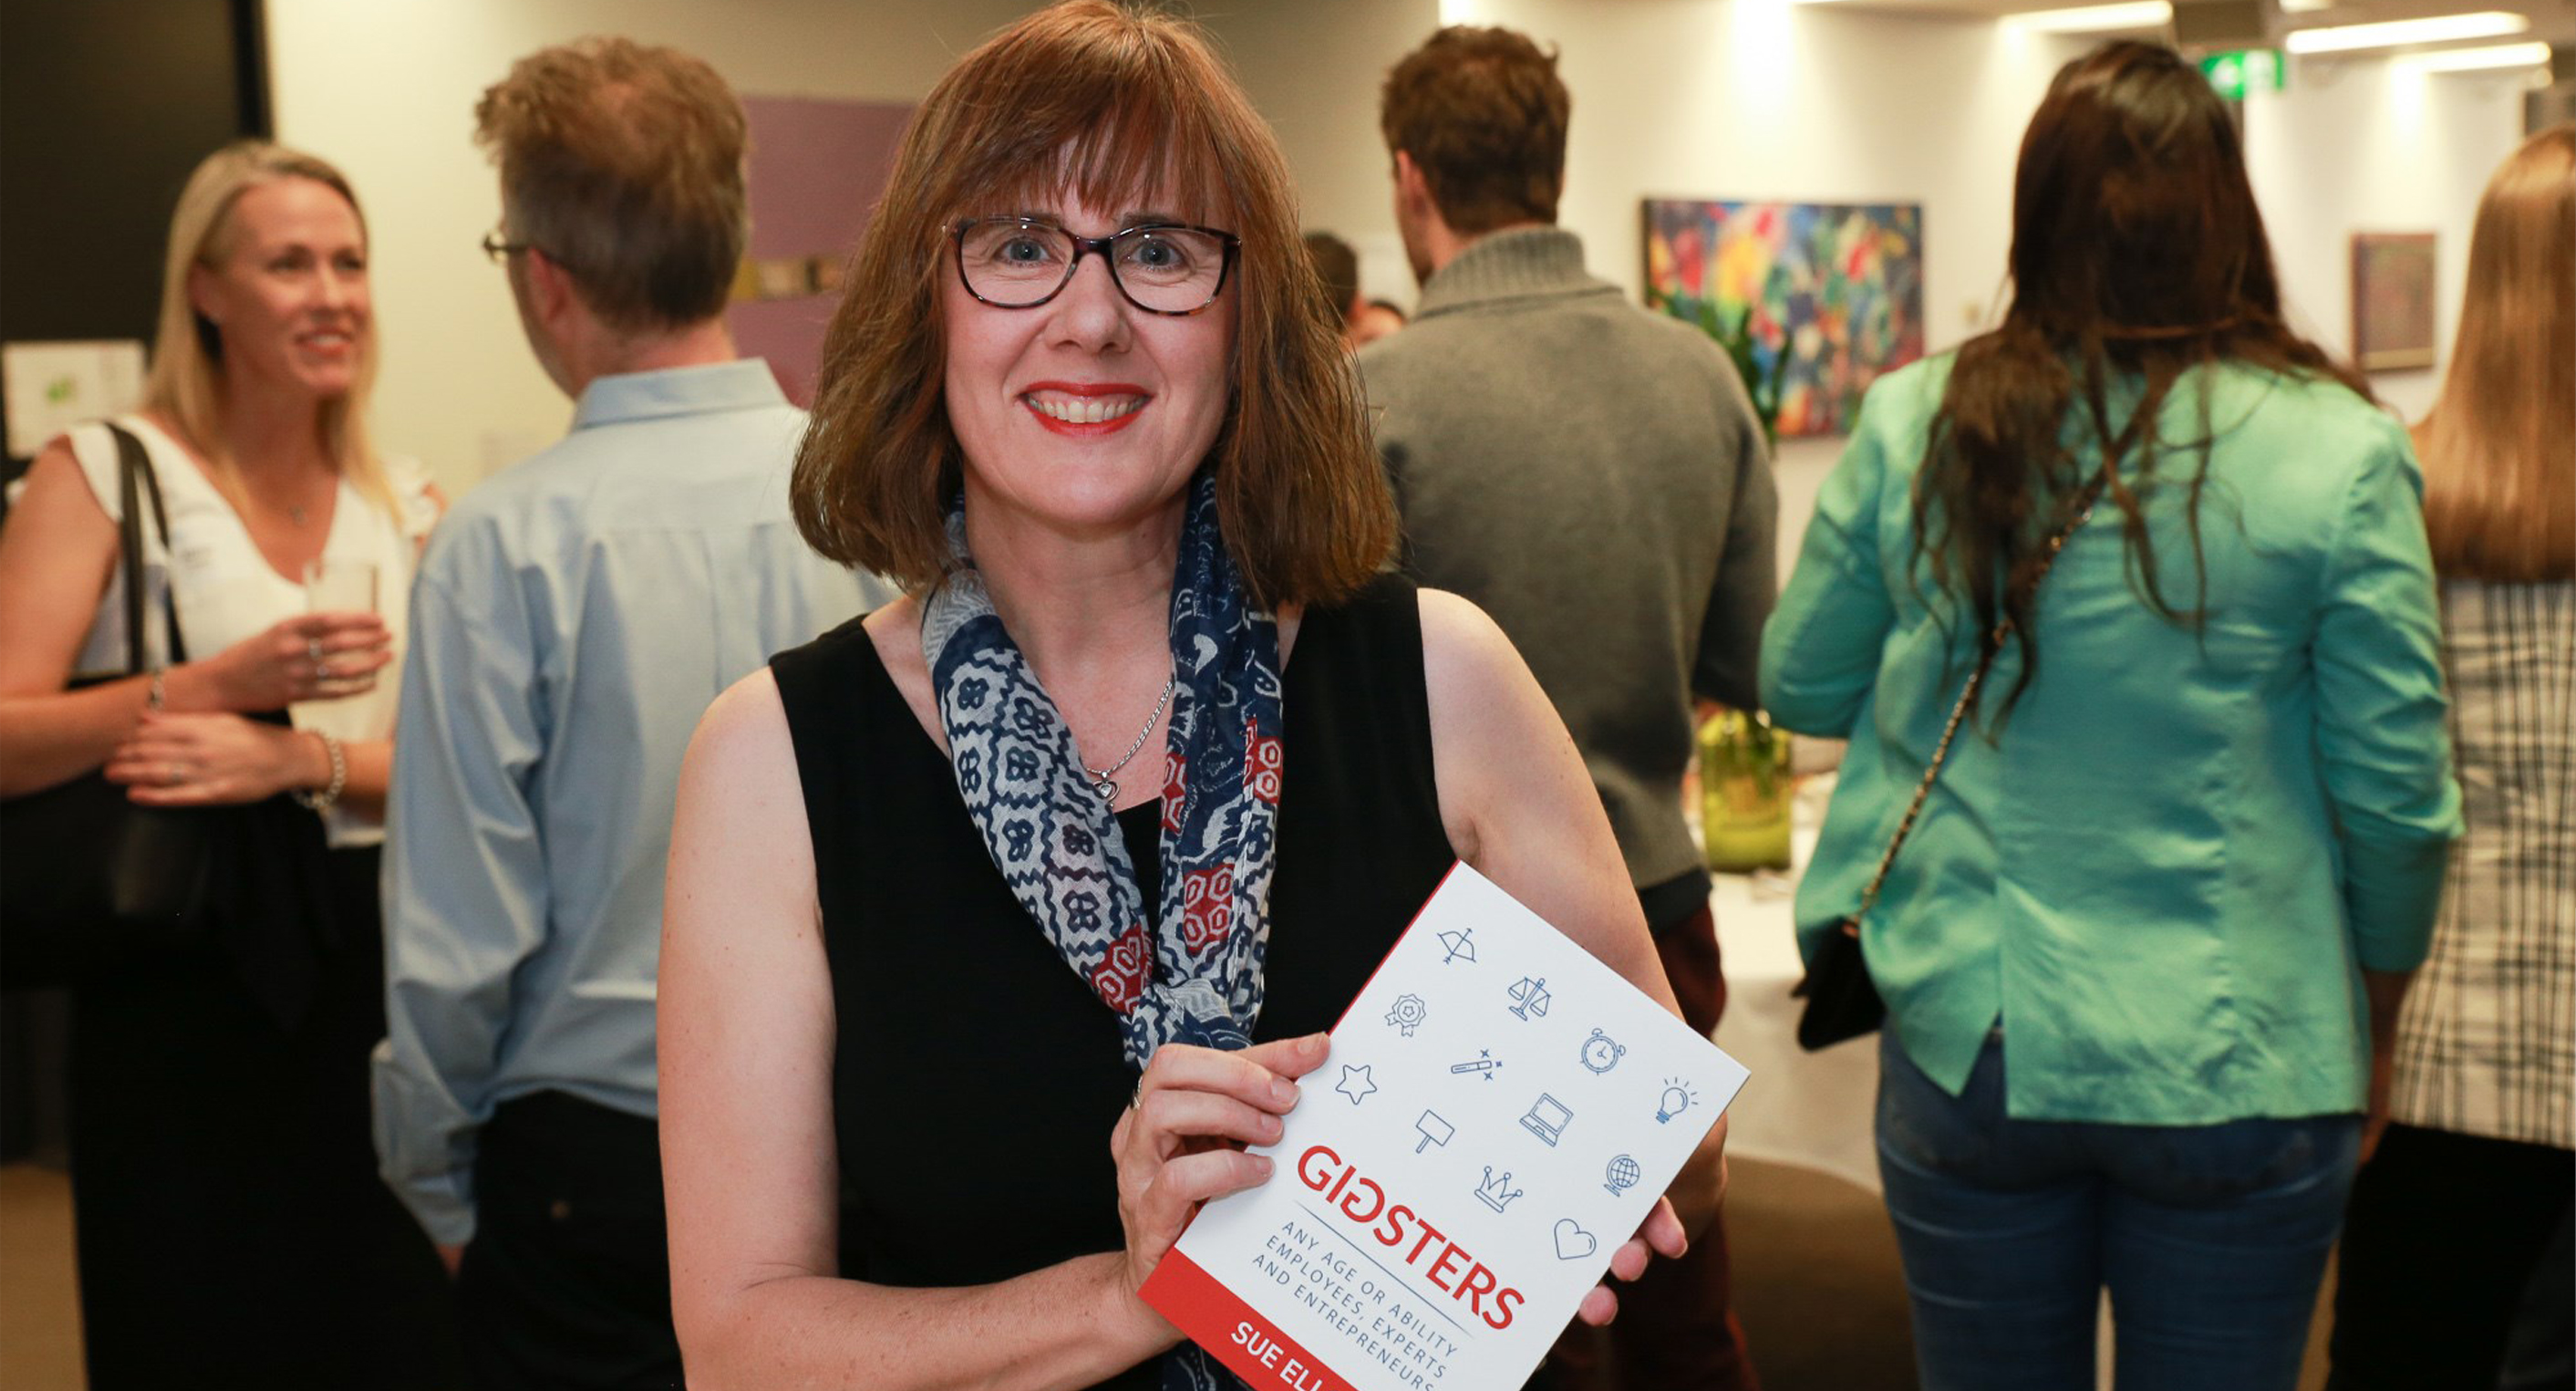 Photograph of Sue Ellson and her book "Gigsters"